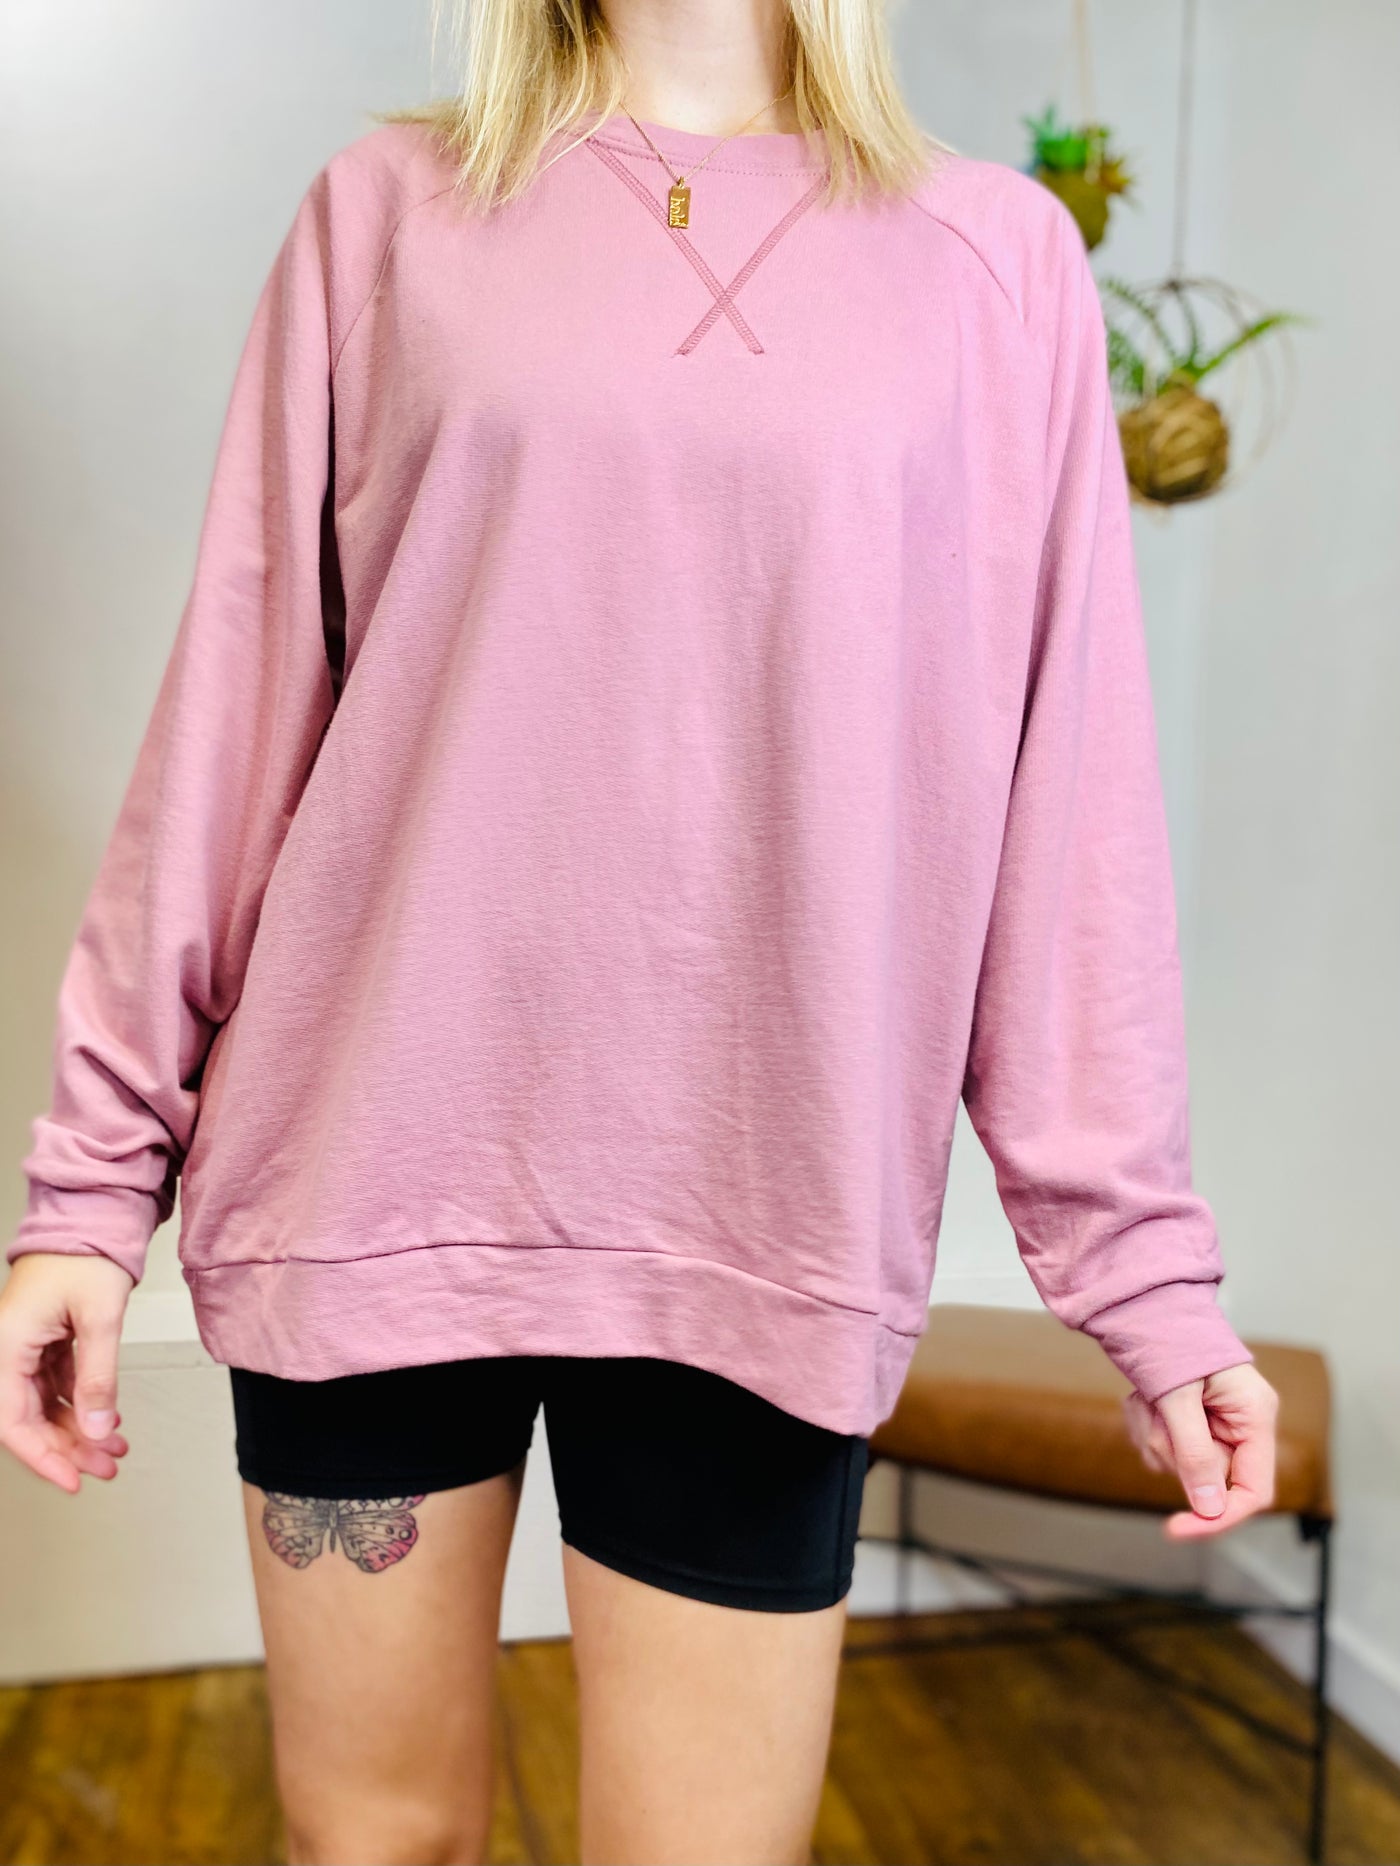 Best of You Pullover Sweater - Mauve-Tops-Anatomy Clothing Boutique in Brenham, Texas